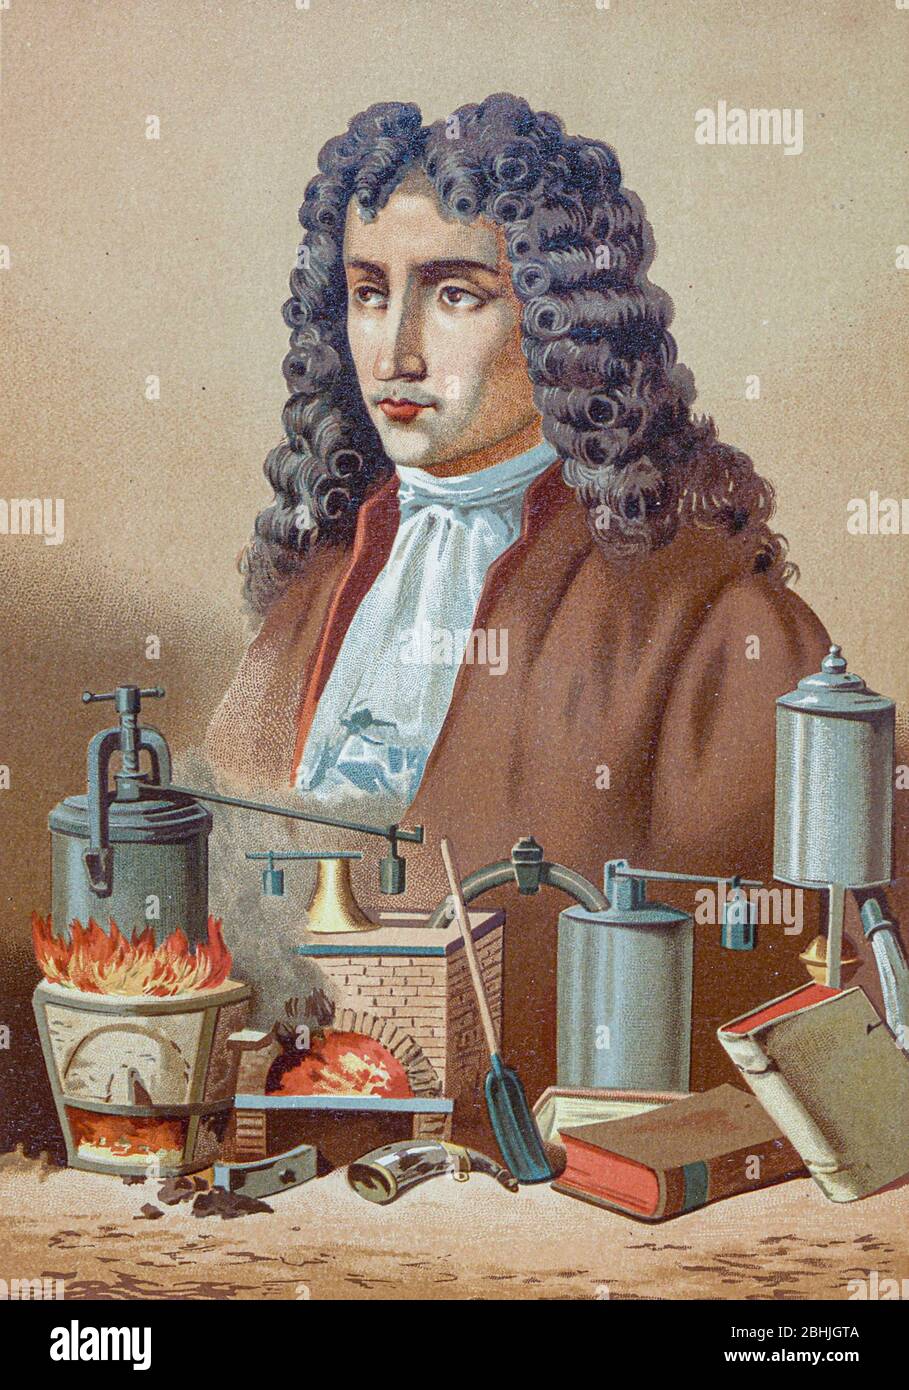 Denis Papin FRS [Dionisio Papin] (22 August 1647 – 26 August 1713) was a French physicist, mathematician and inventor, best known for his pioneering invention of the steam digester, the forerunner of the pressure cooker and of the steam engine From the book La ciencia y sus hombres : vidas de los sabios ilustres desde la antigüedad hasta el siglo XIX T. 2  [Science and its men: lives of the illustrious sages from antiquity to the 19th century Vol 2] By by Figuier, Louis, (1819-1894); Casabó y Pagés, Pelegrín, n. 1831 Published in Barcelona by D. Jaime Seix, editor , 1879 (Imprenta de Baseda y Stock Photo